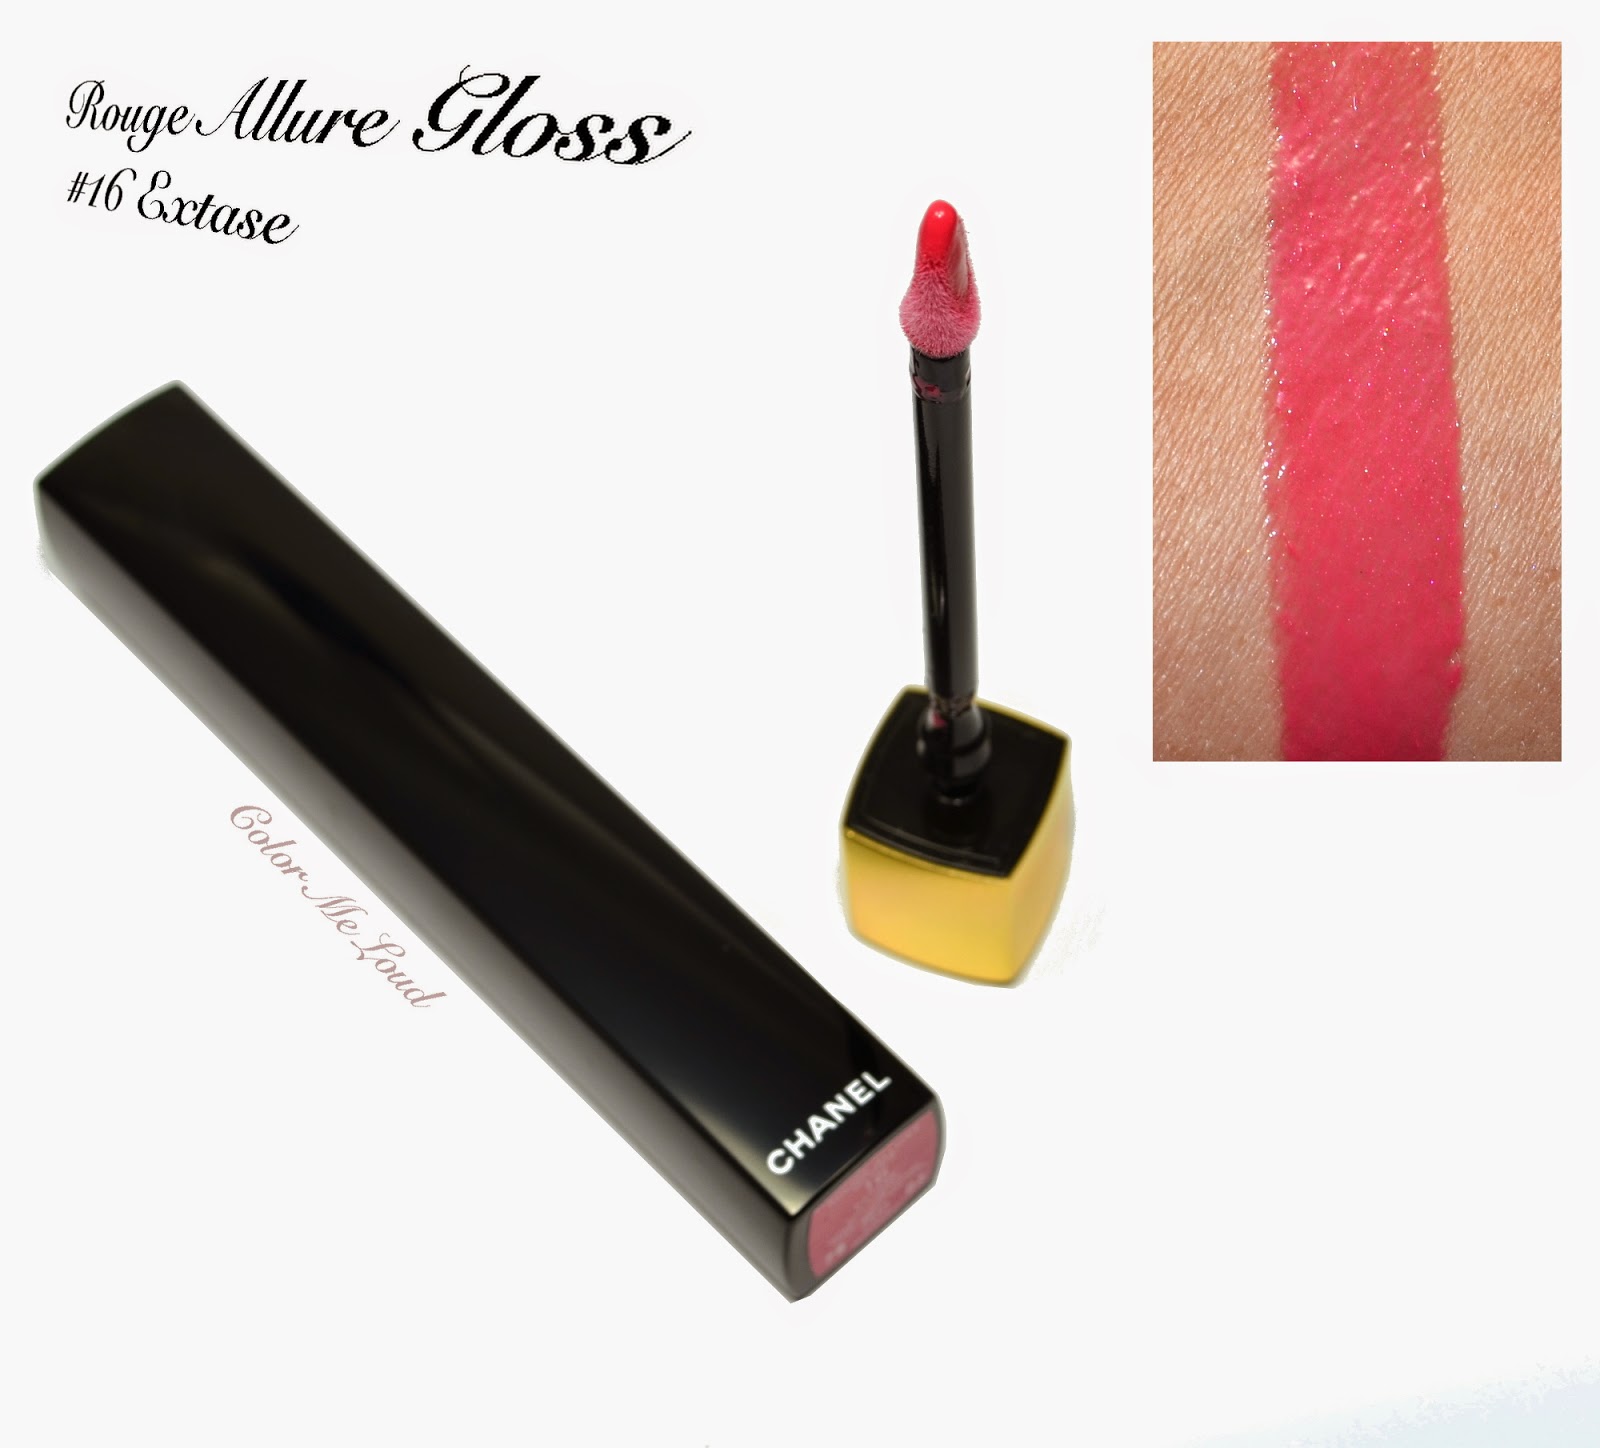 Chanel Sensuel (11) Rouge Allure Gloss Review & Swatches